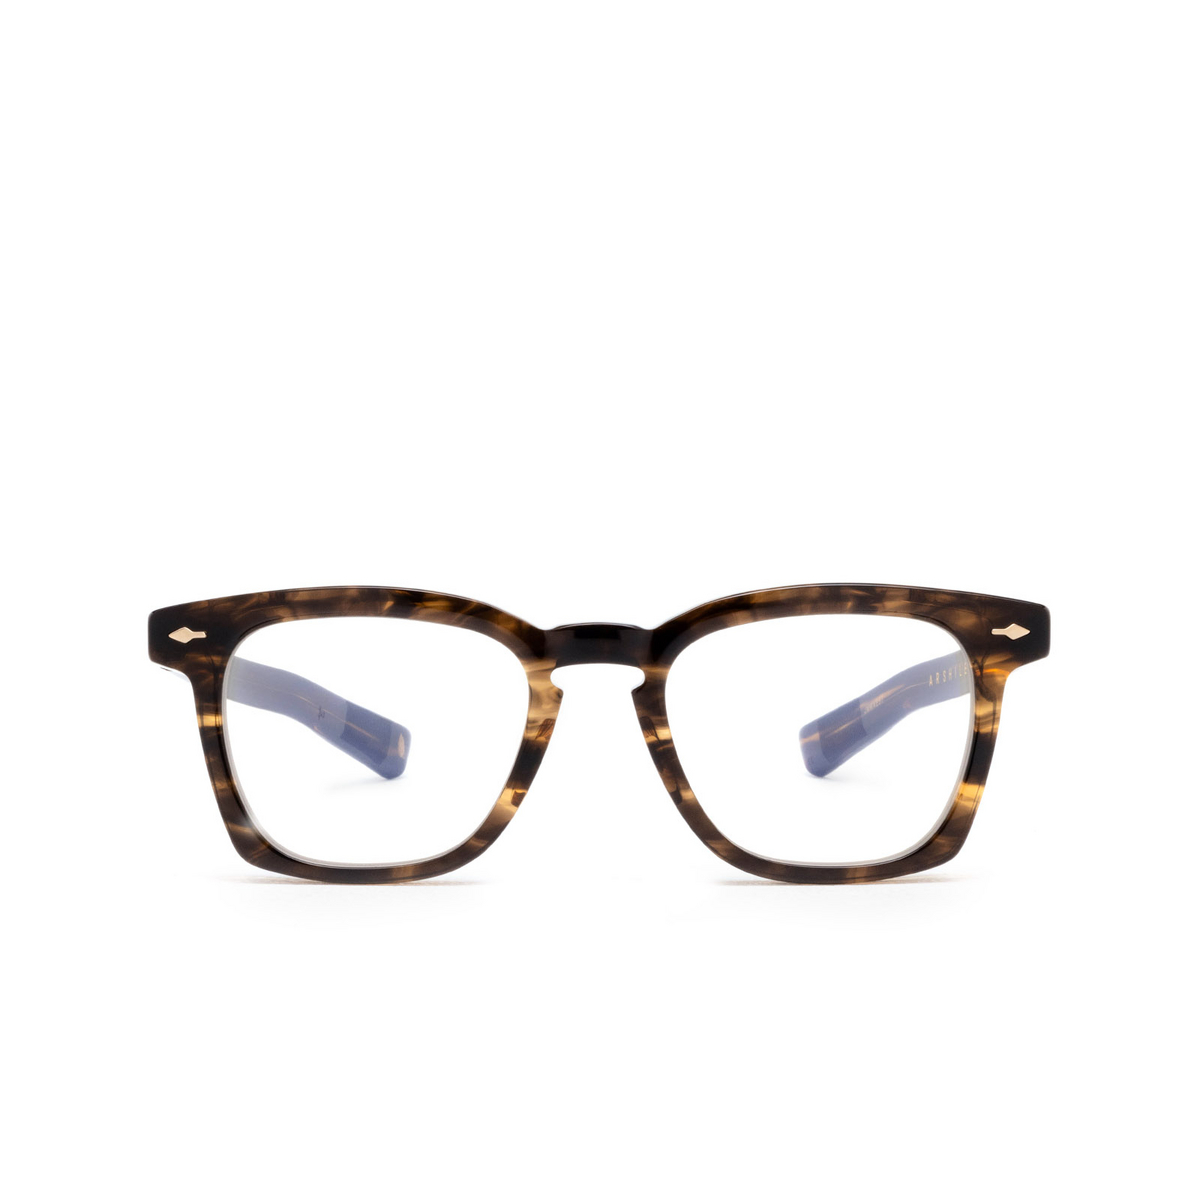 Jacques Marie Mage® Square Eyeglasses: Arshile color Flash - front view